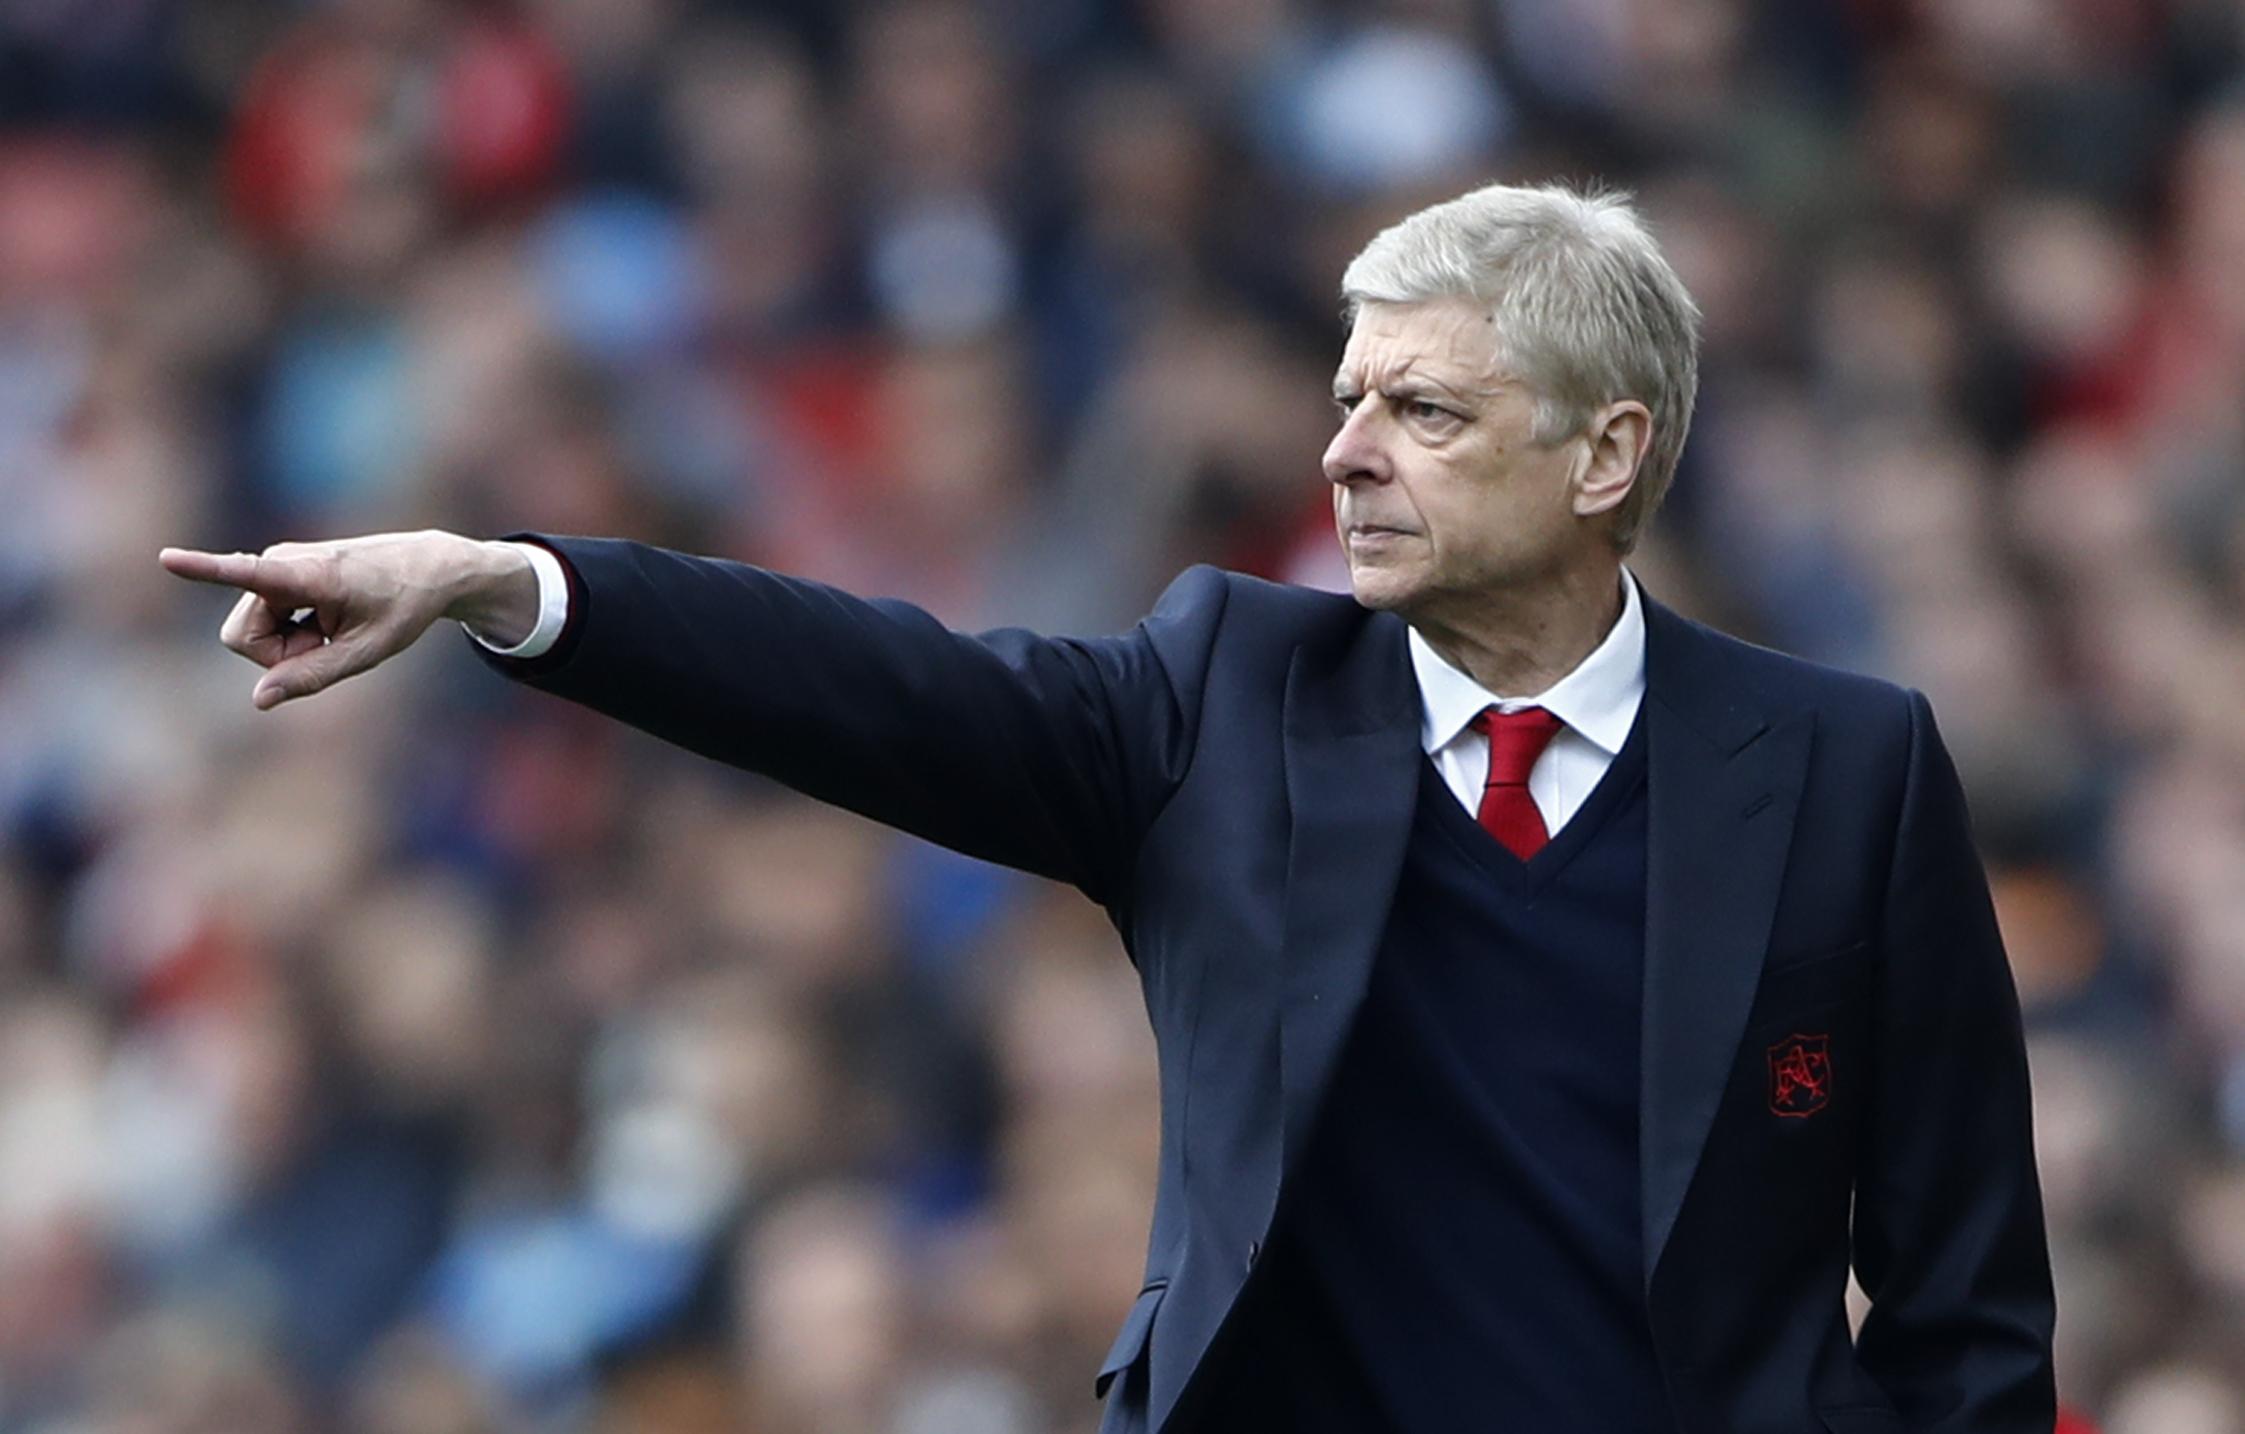 Football: Exit from Champions League wouldn't harm contract talks, says Wenger